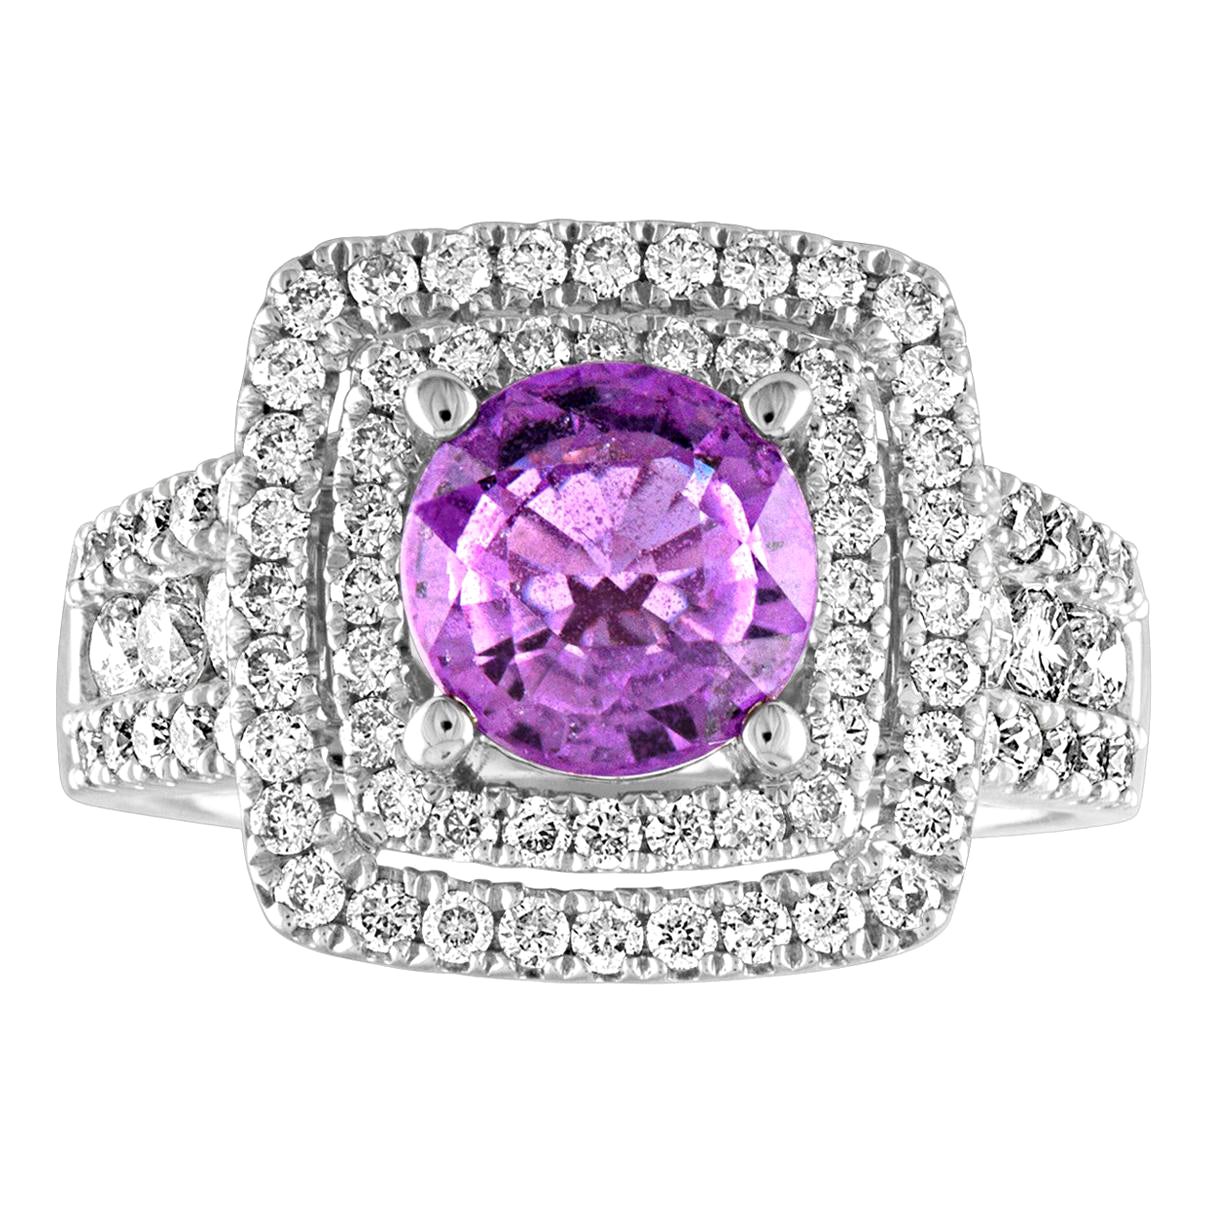 Certified No Heat 1.97 Carat Pinkish Violet Sapphire Diamond Gold Ring For Sale